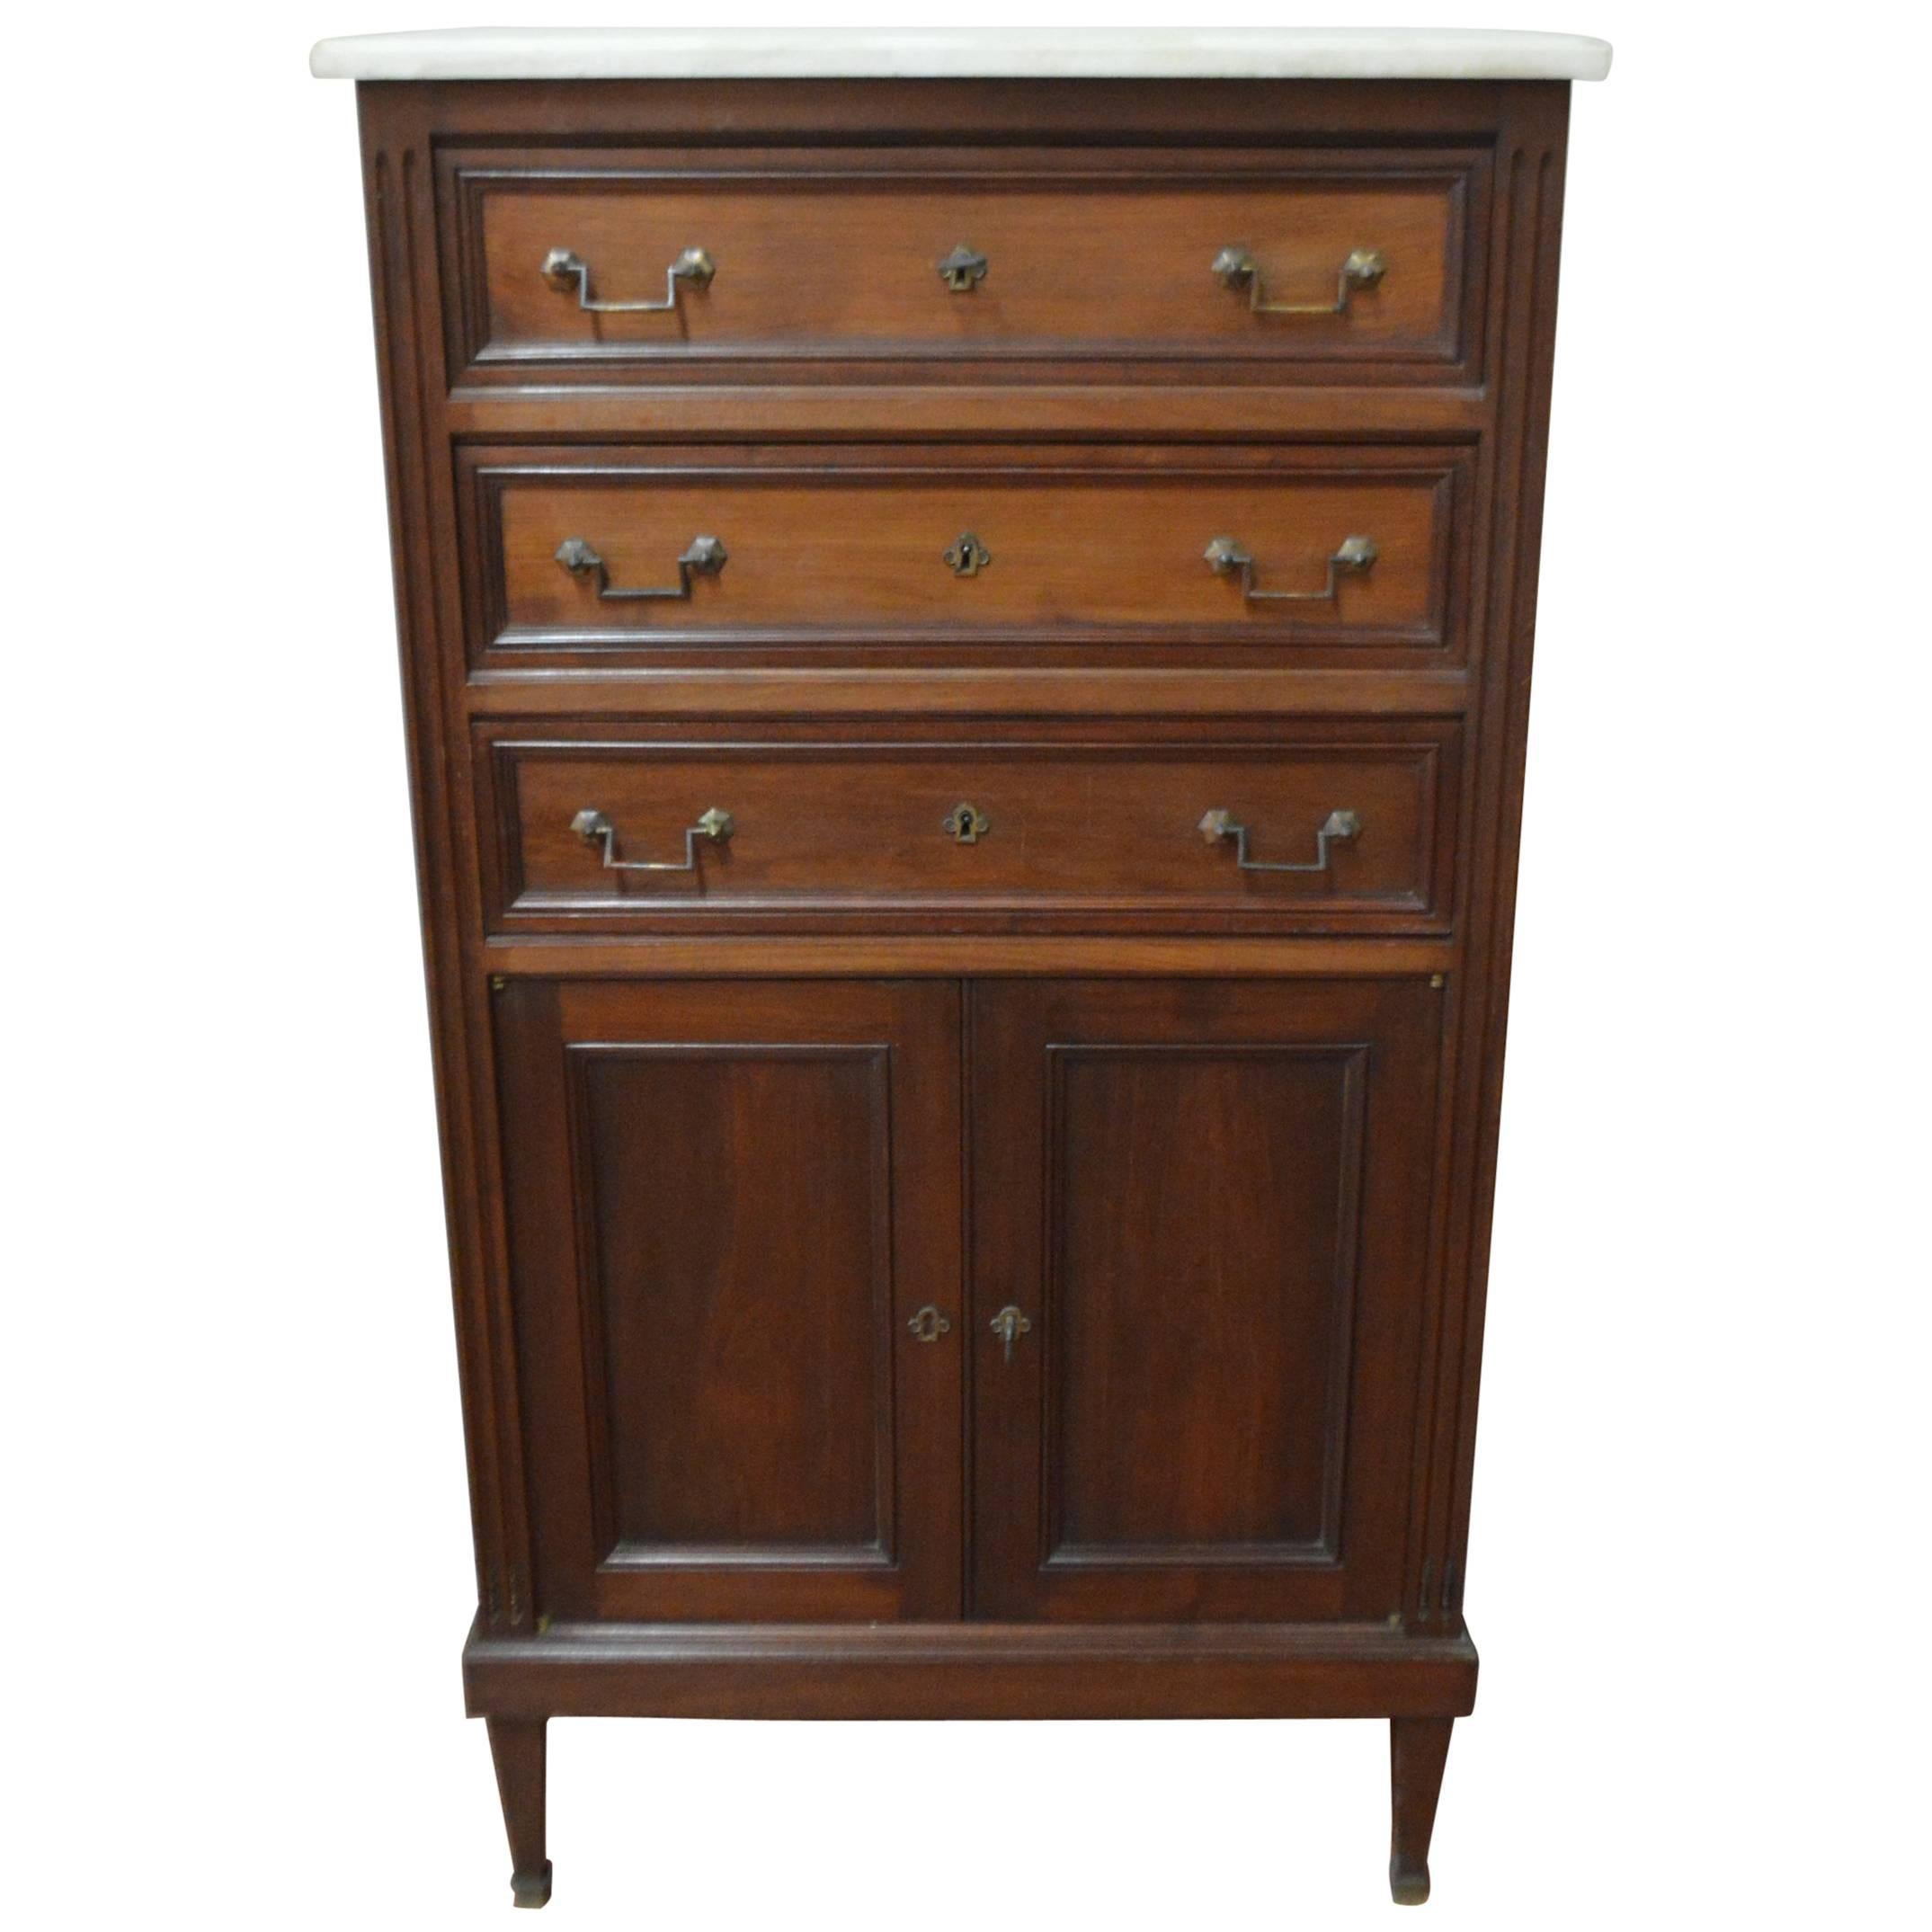 Louis XVI Style Mahogany Cabinet, Three Drawers Top and Two-Door Compartment